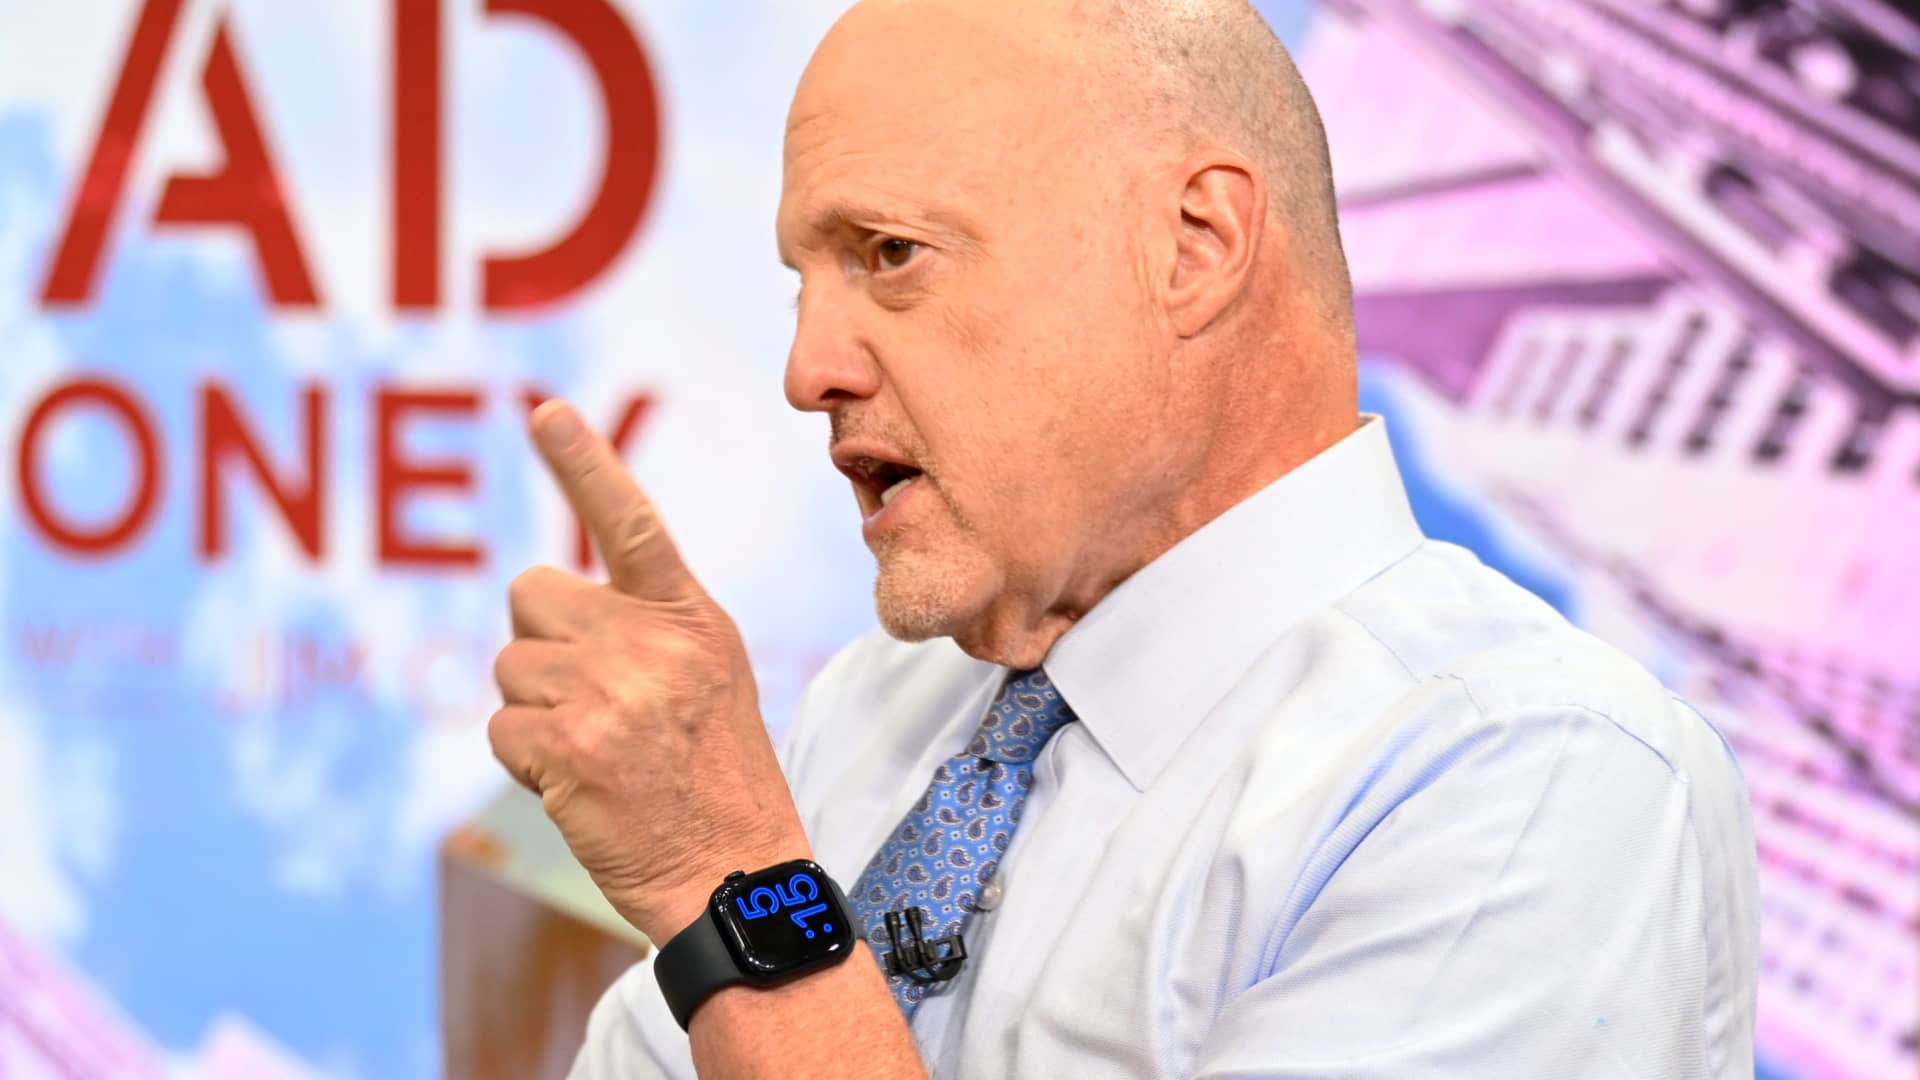 Jim Cramer’s week ahead: Earnings and economic data should give clues on Fed policy